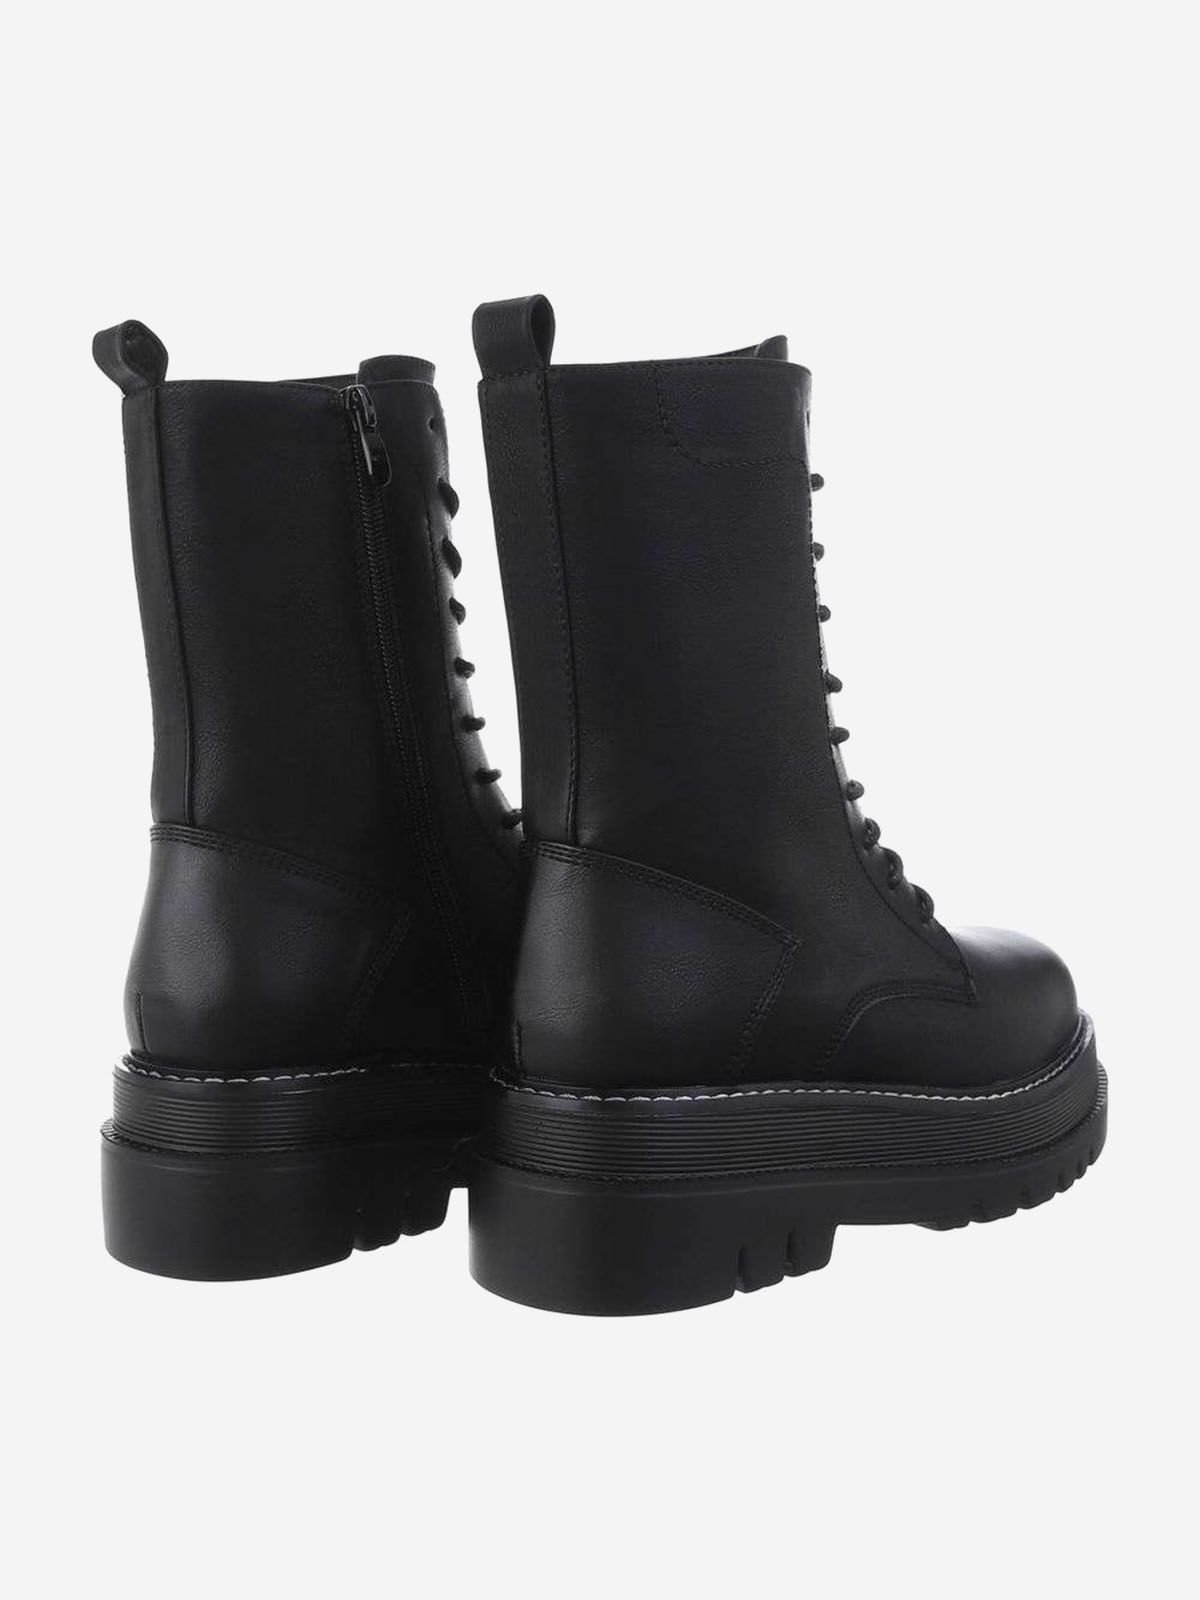 Lace-up women's ankle boots with platform in black